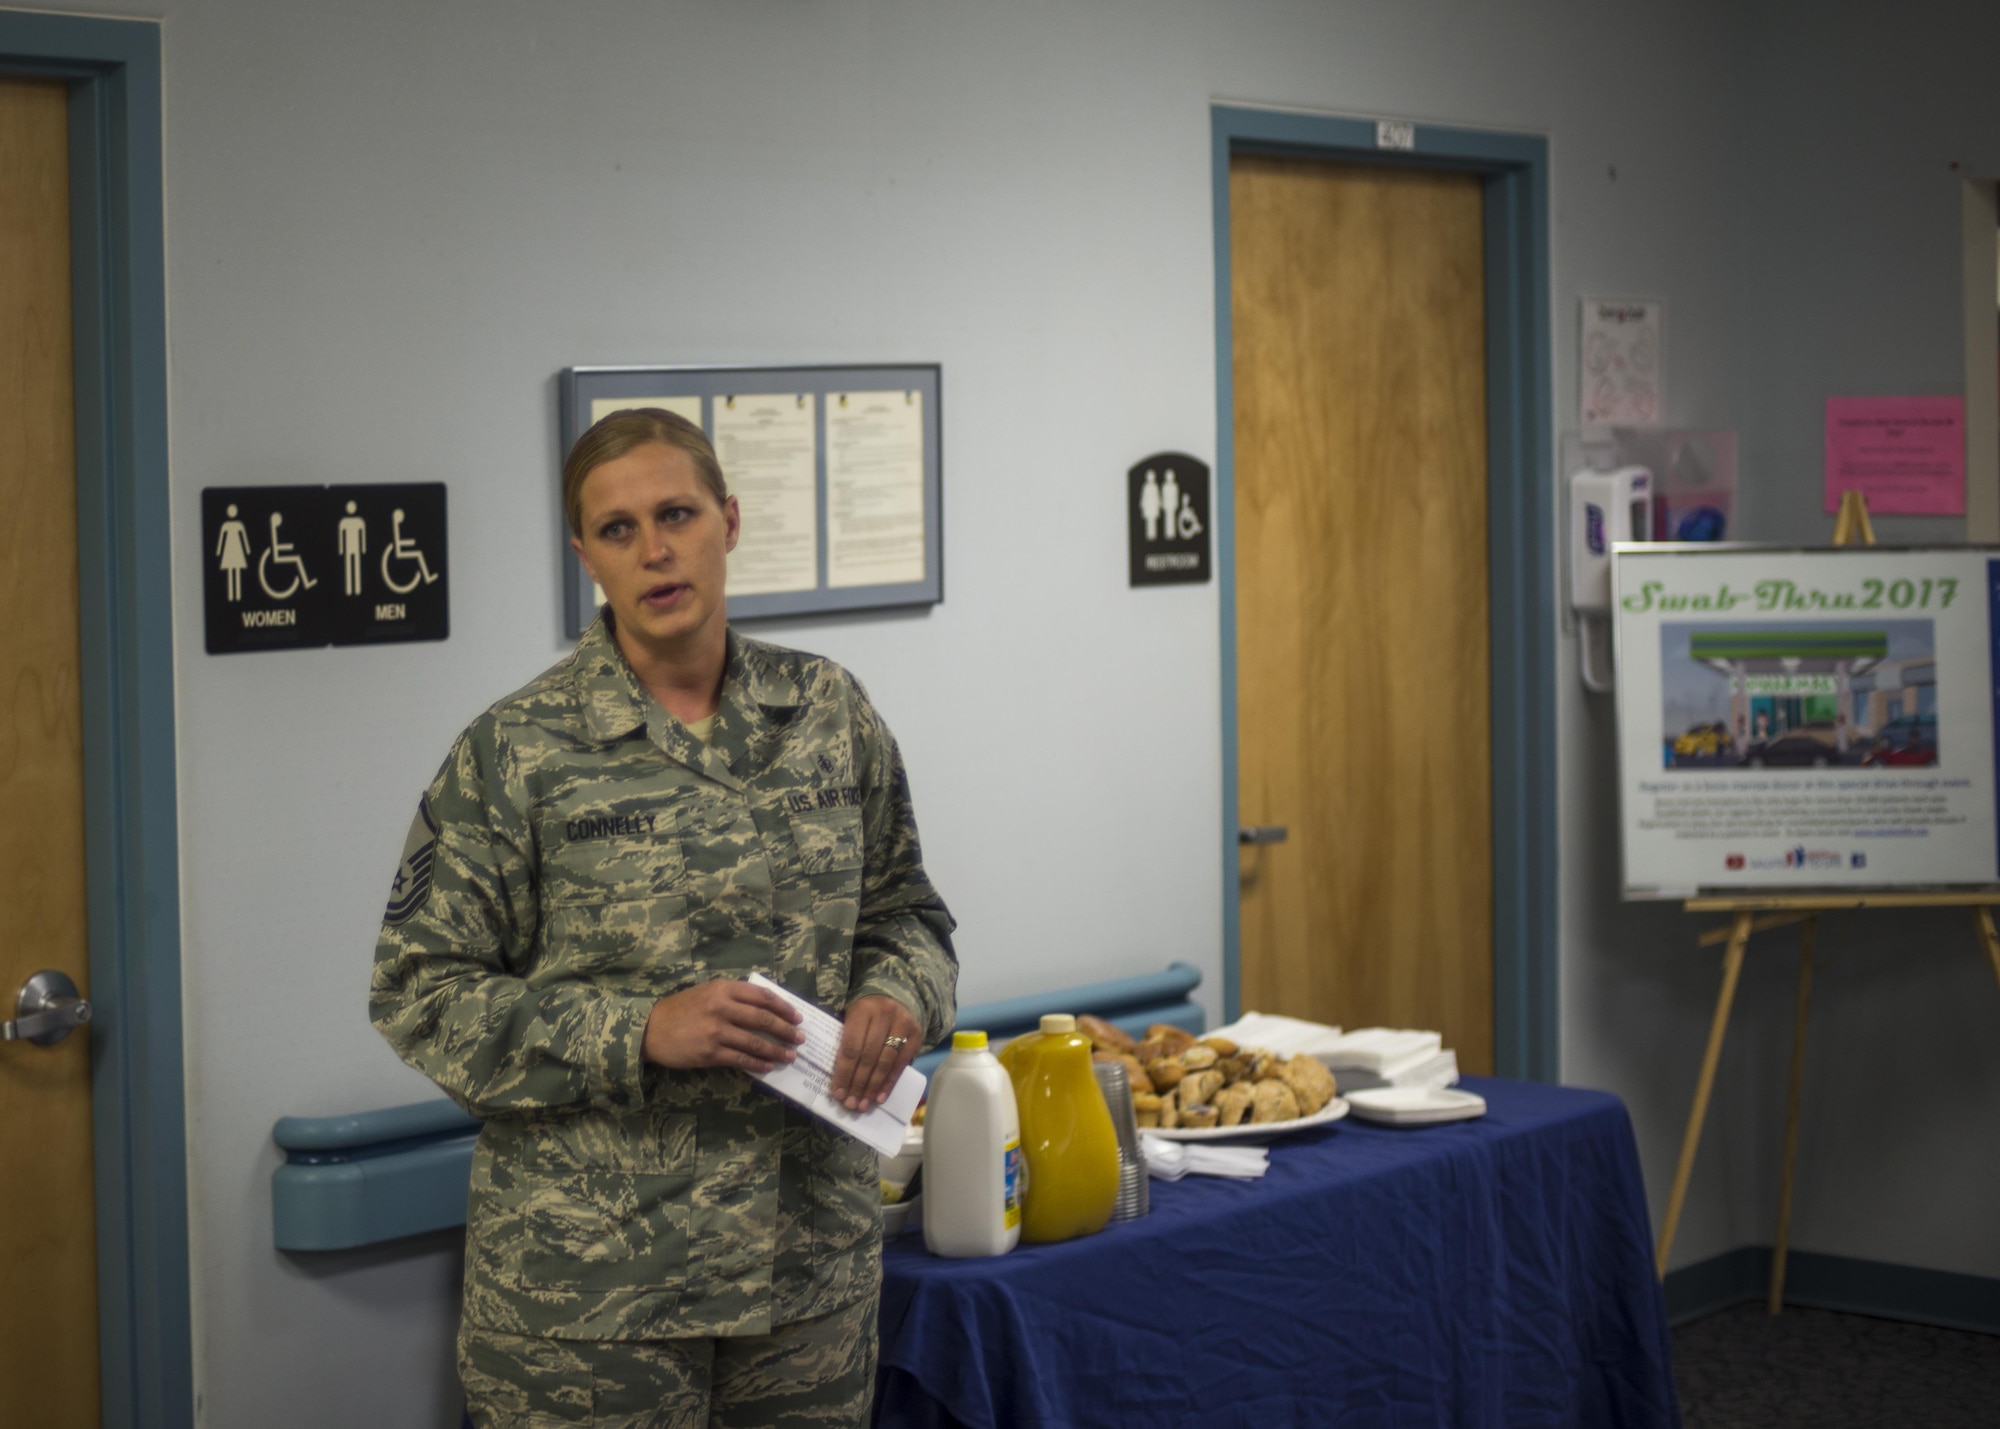 Master Sgt. Crystal Connelly, the 49th Medical Group Diagnostic and Therapeutics flight chief, addresses a room of people during the MDG's Swab-Thru event, at Holloman Air Force Base, N.M. on April 20, 2017. The Swab-Thru, coordinated with the “Salute to Life” program, is a special drive-thru bone marrow registration event. Connelly was inspired to bring the program to Holloman after her mother-in-law was diagnosed with cancer. (U.S. Air Force photo by Airman 1st Class Alexis P. Docherty)